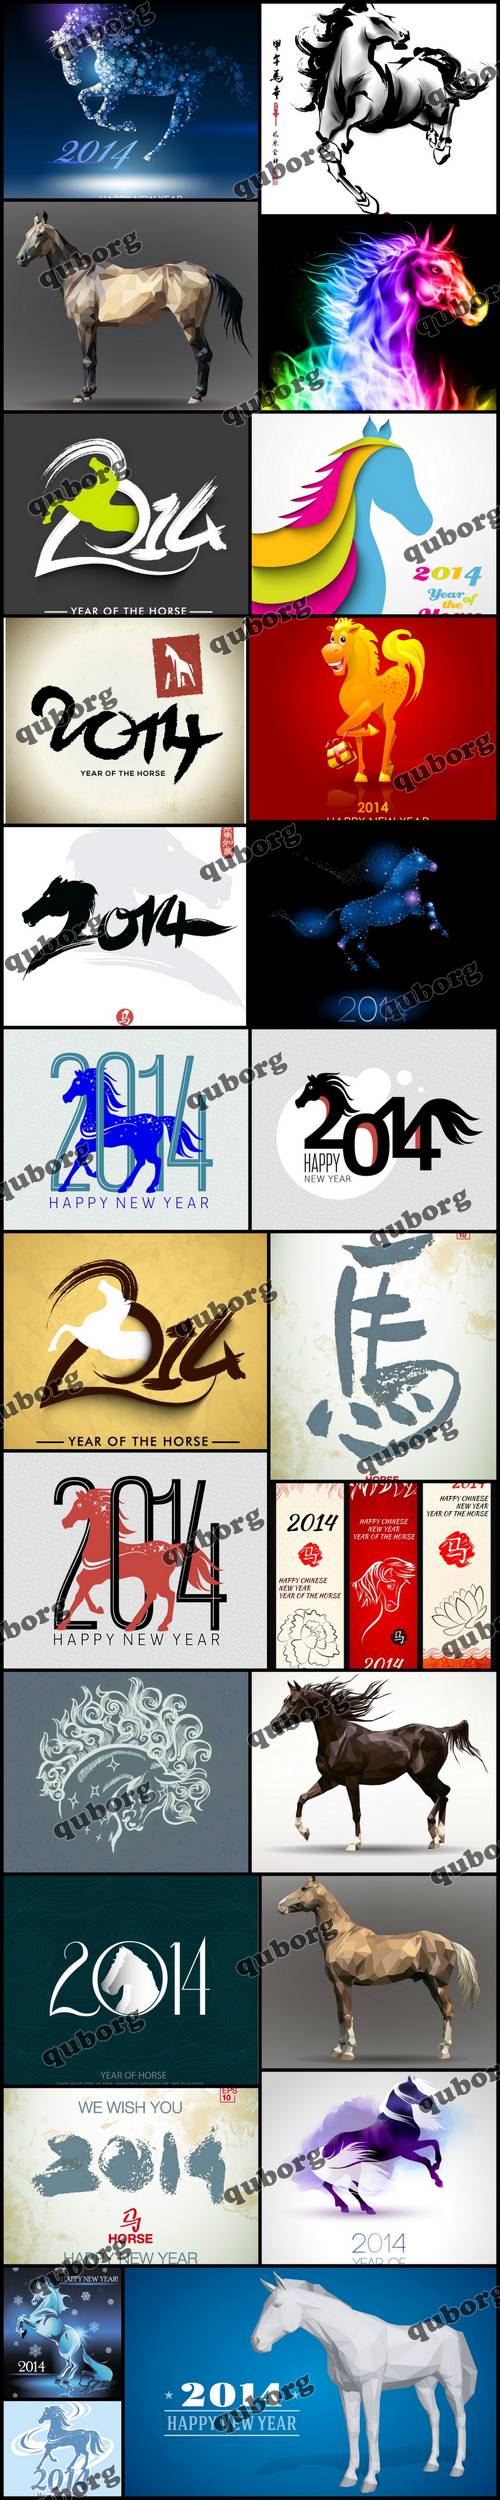 Stock Vector - 2014 - Year of Horse